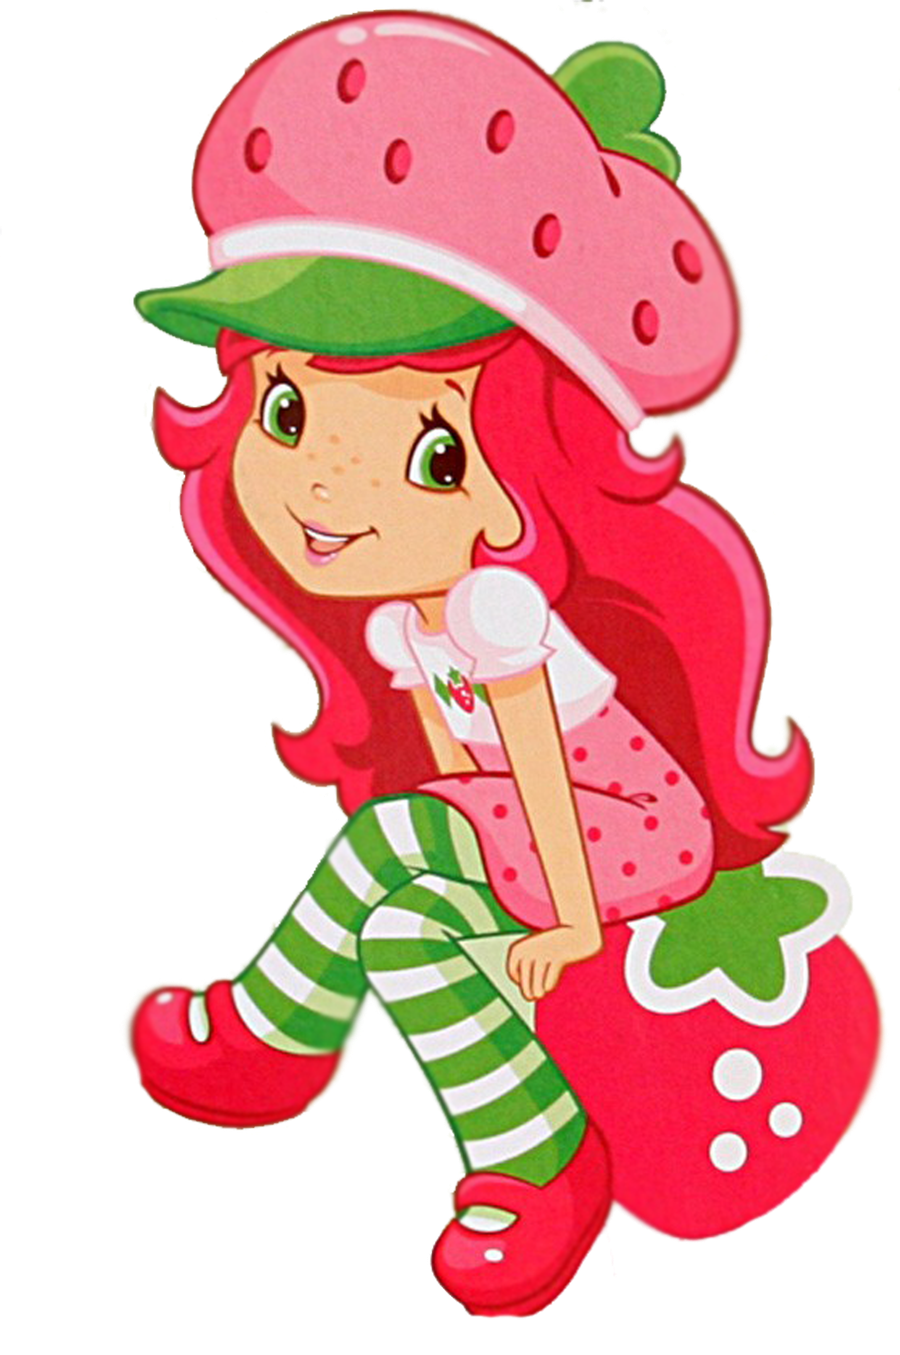 doll-clipart-strawberry-5.png